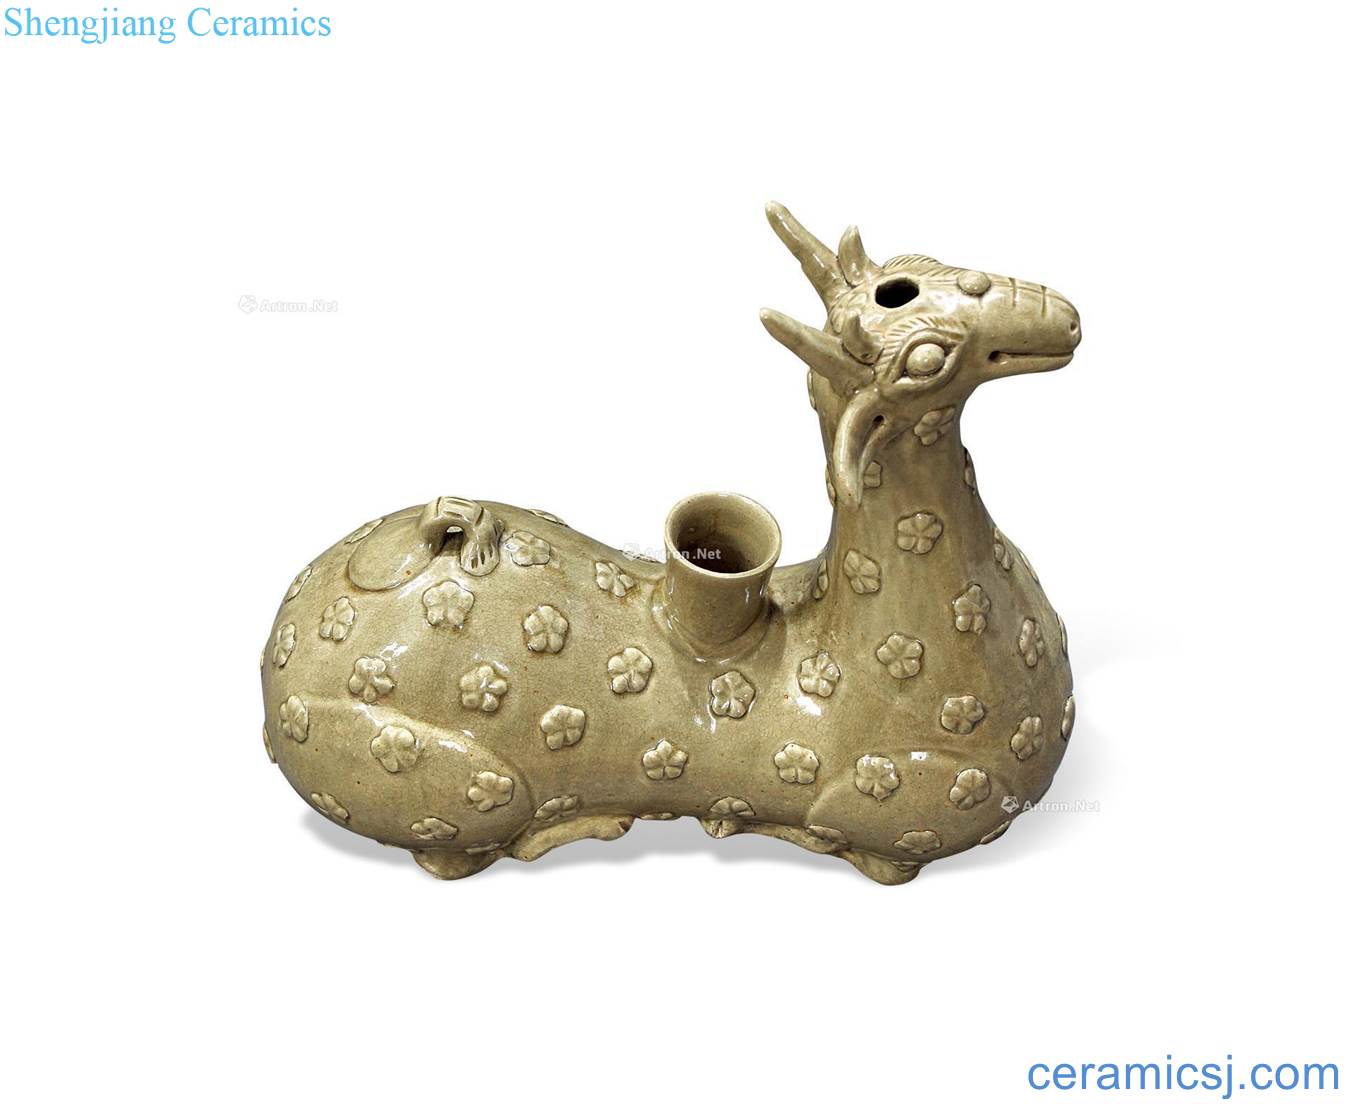 The song of the kiln new moon sika deer